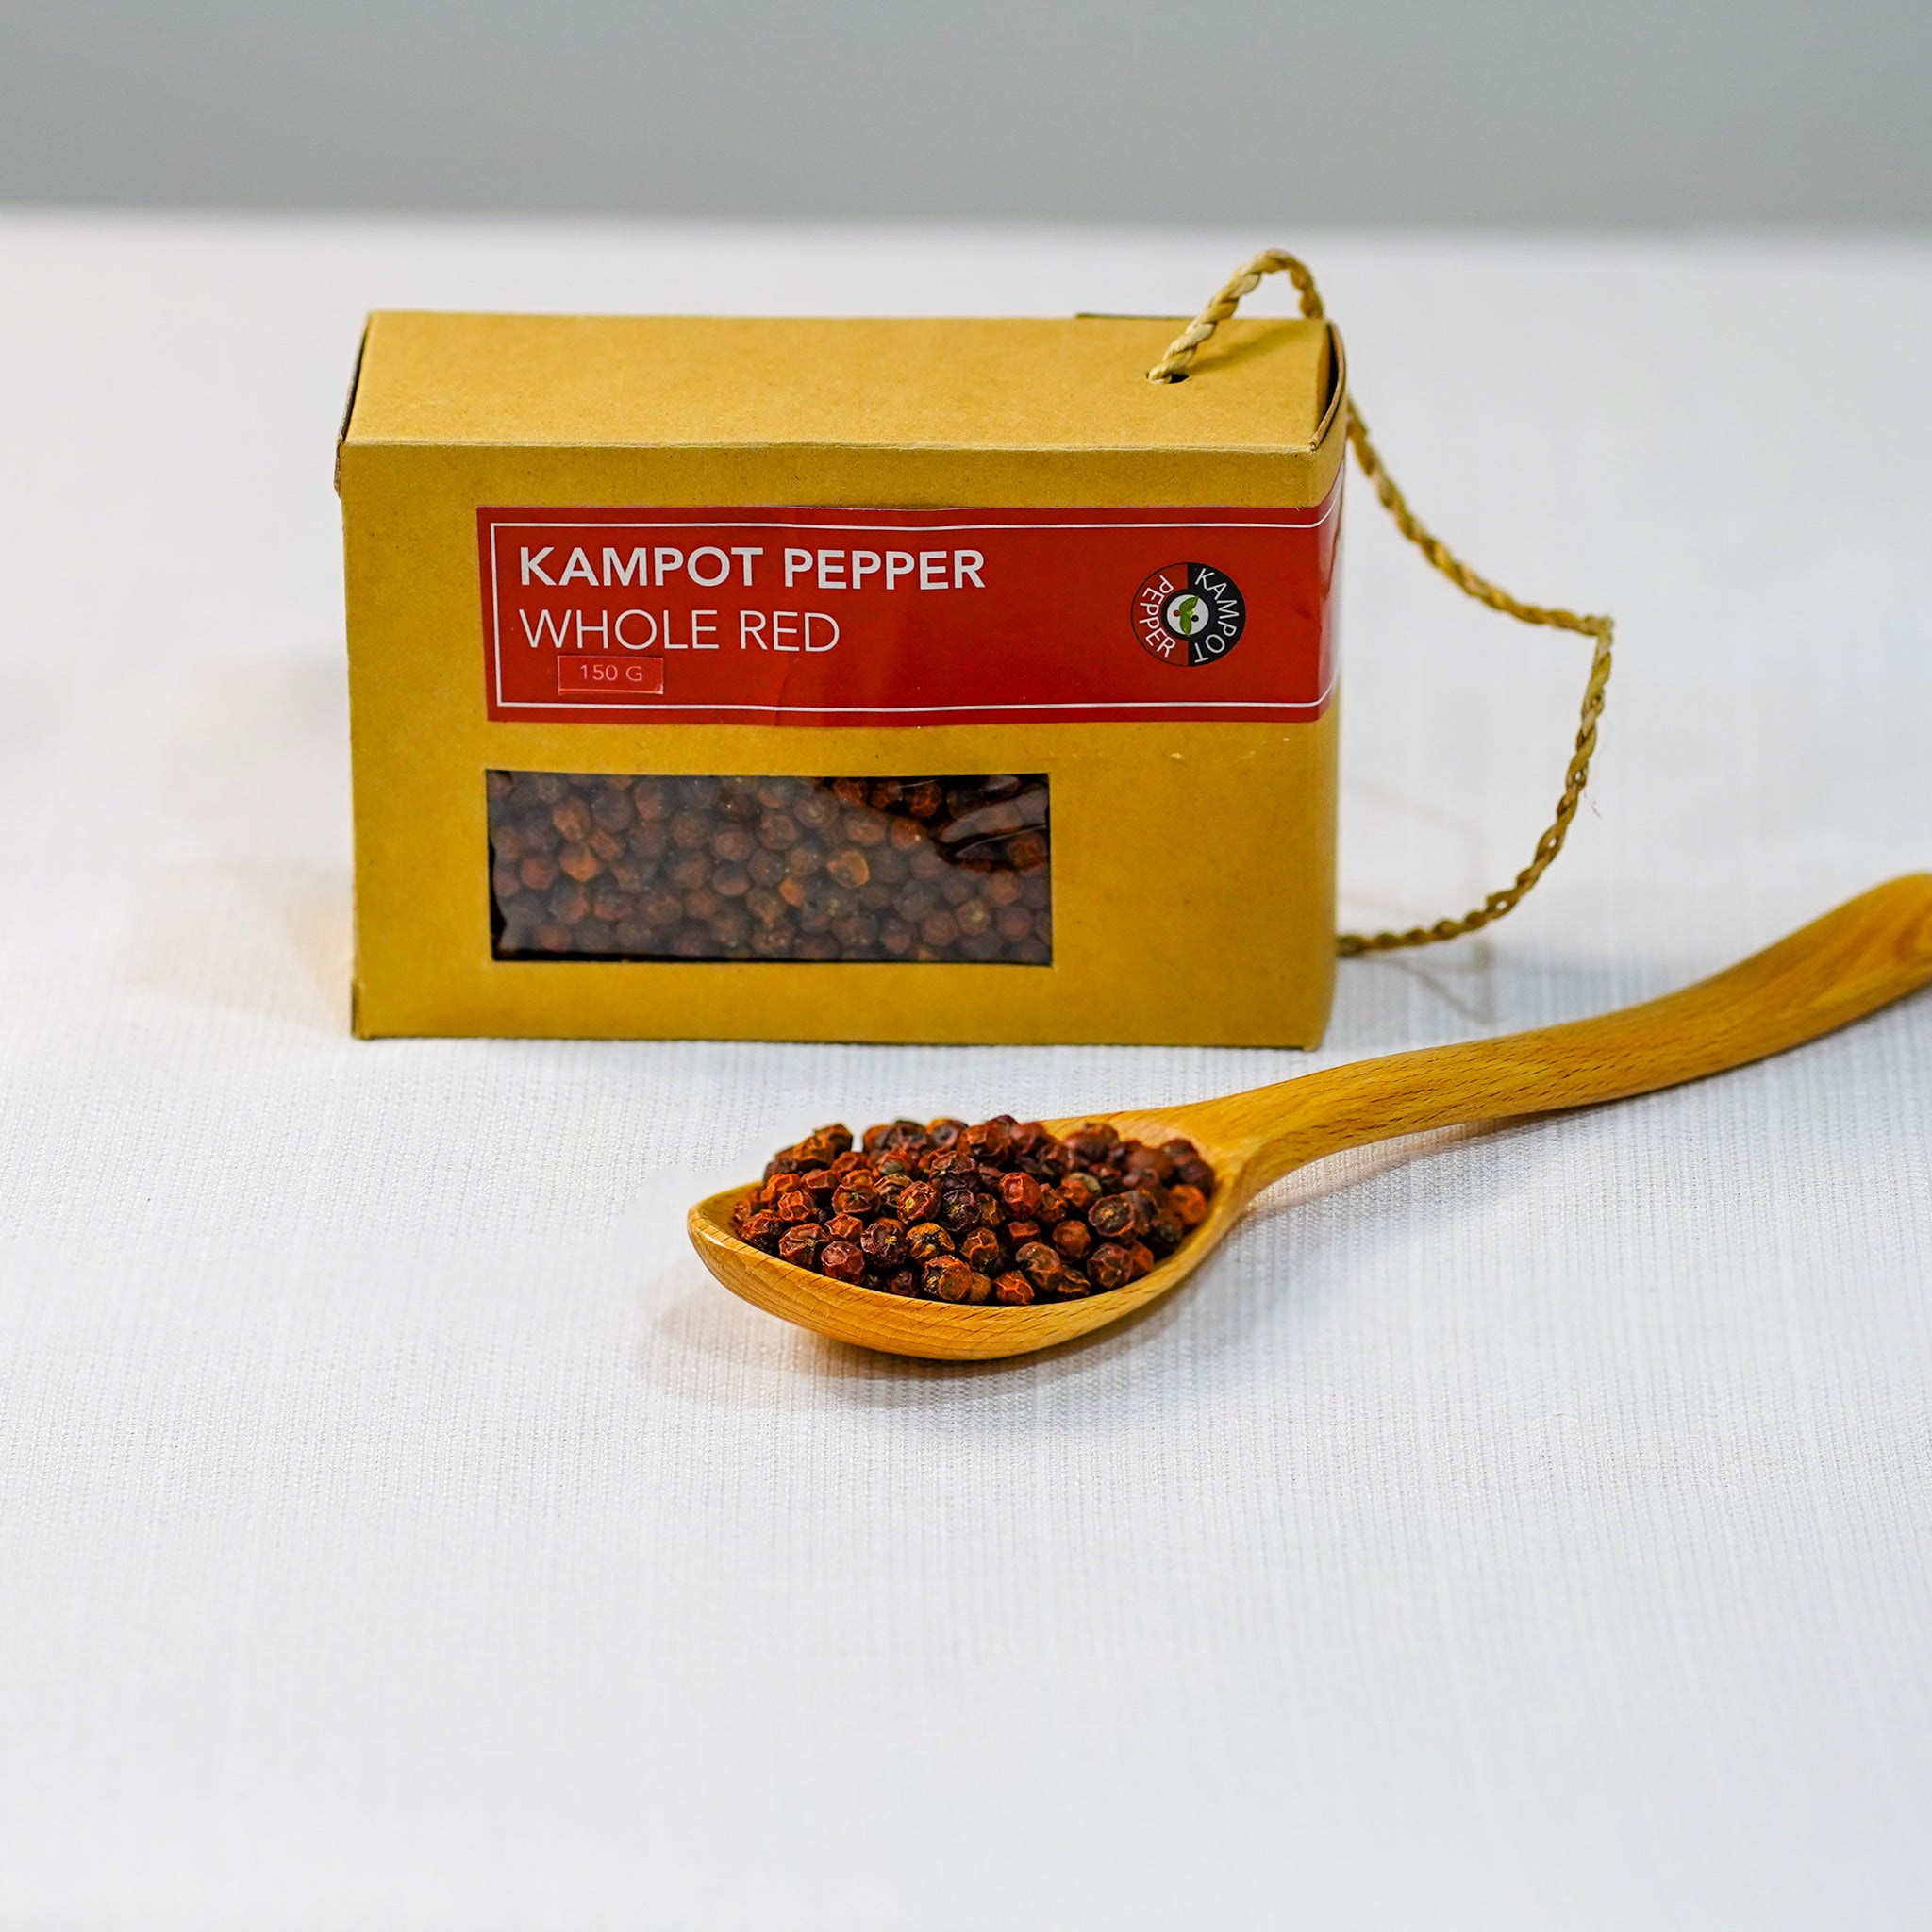 Spice up your food with Cambodia's renowned Kampot peppers. These red peppercorns are small drops of peppery heat that explode in your mouth and spice up your food magically.